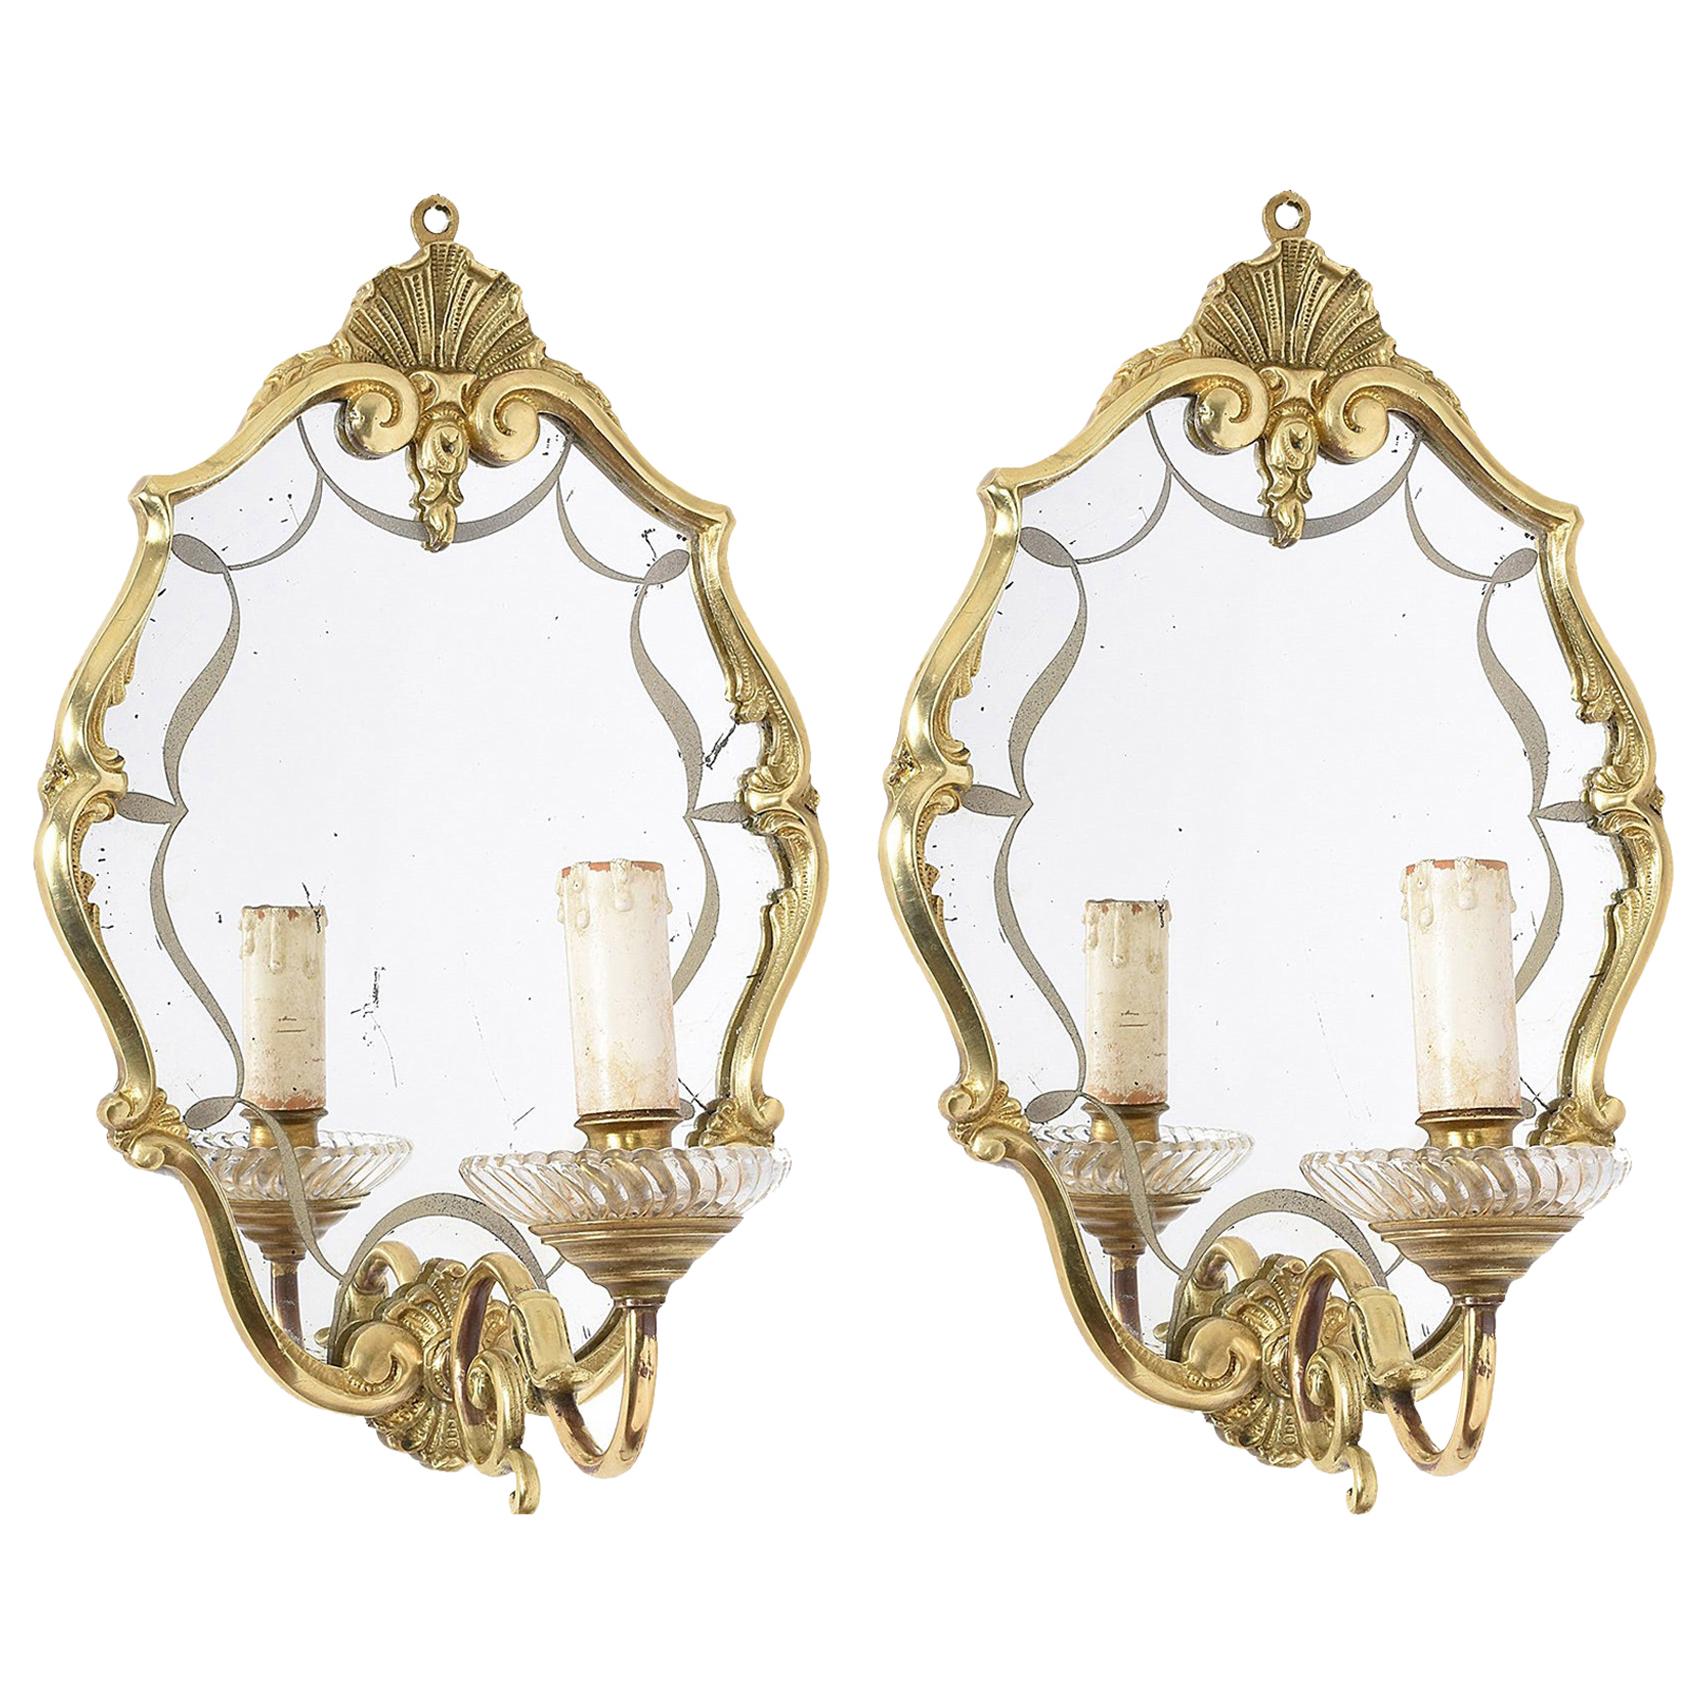 Early 20th Century Pair of Italian Decorative Brass Wall Lights with Mirror